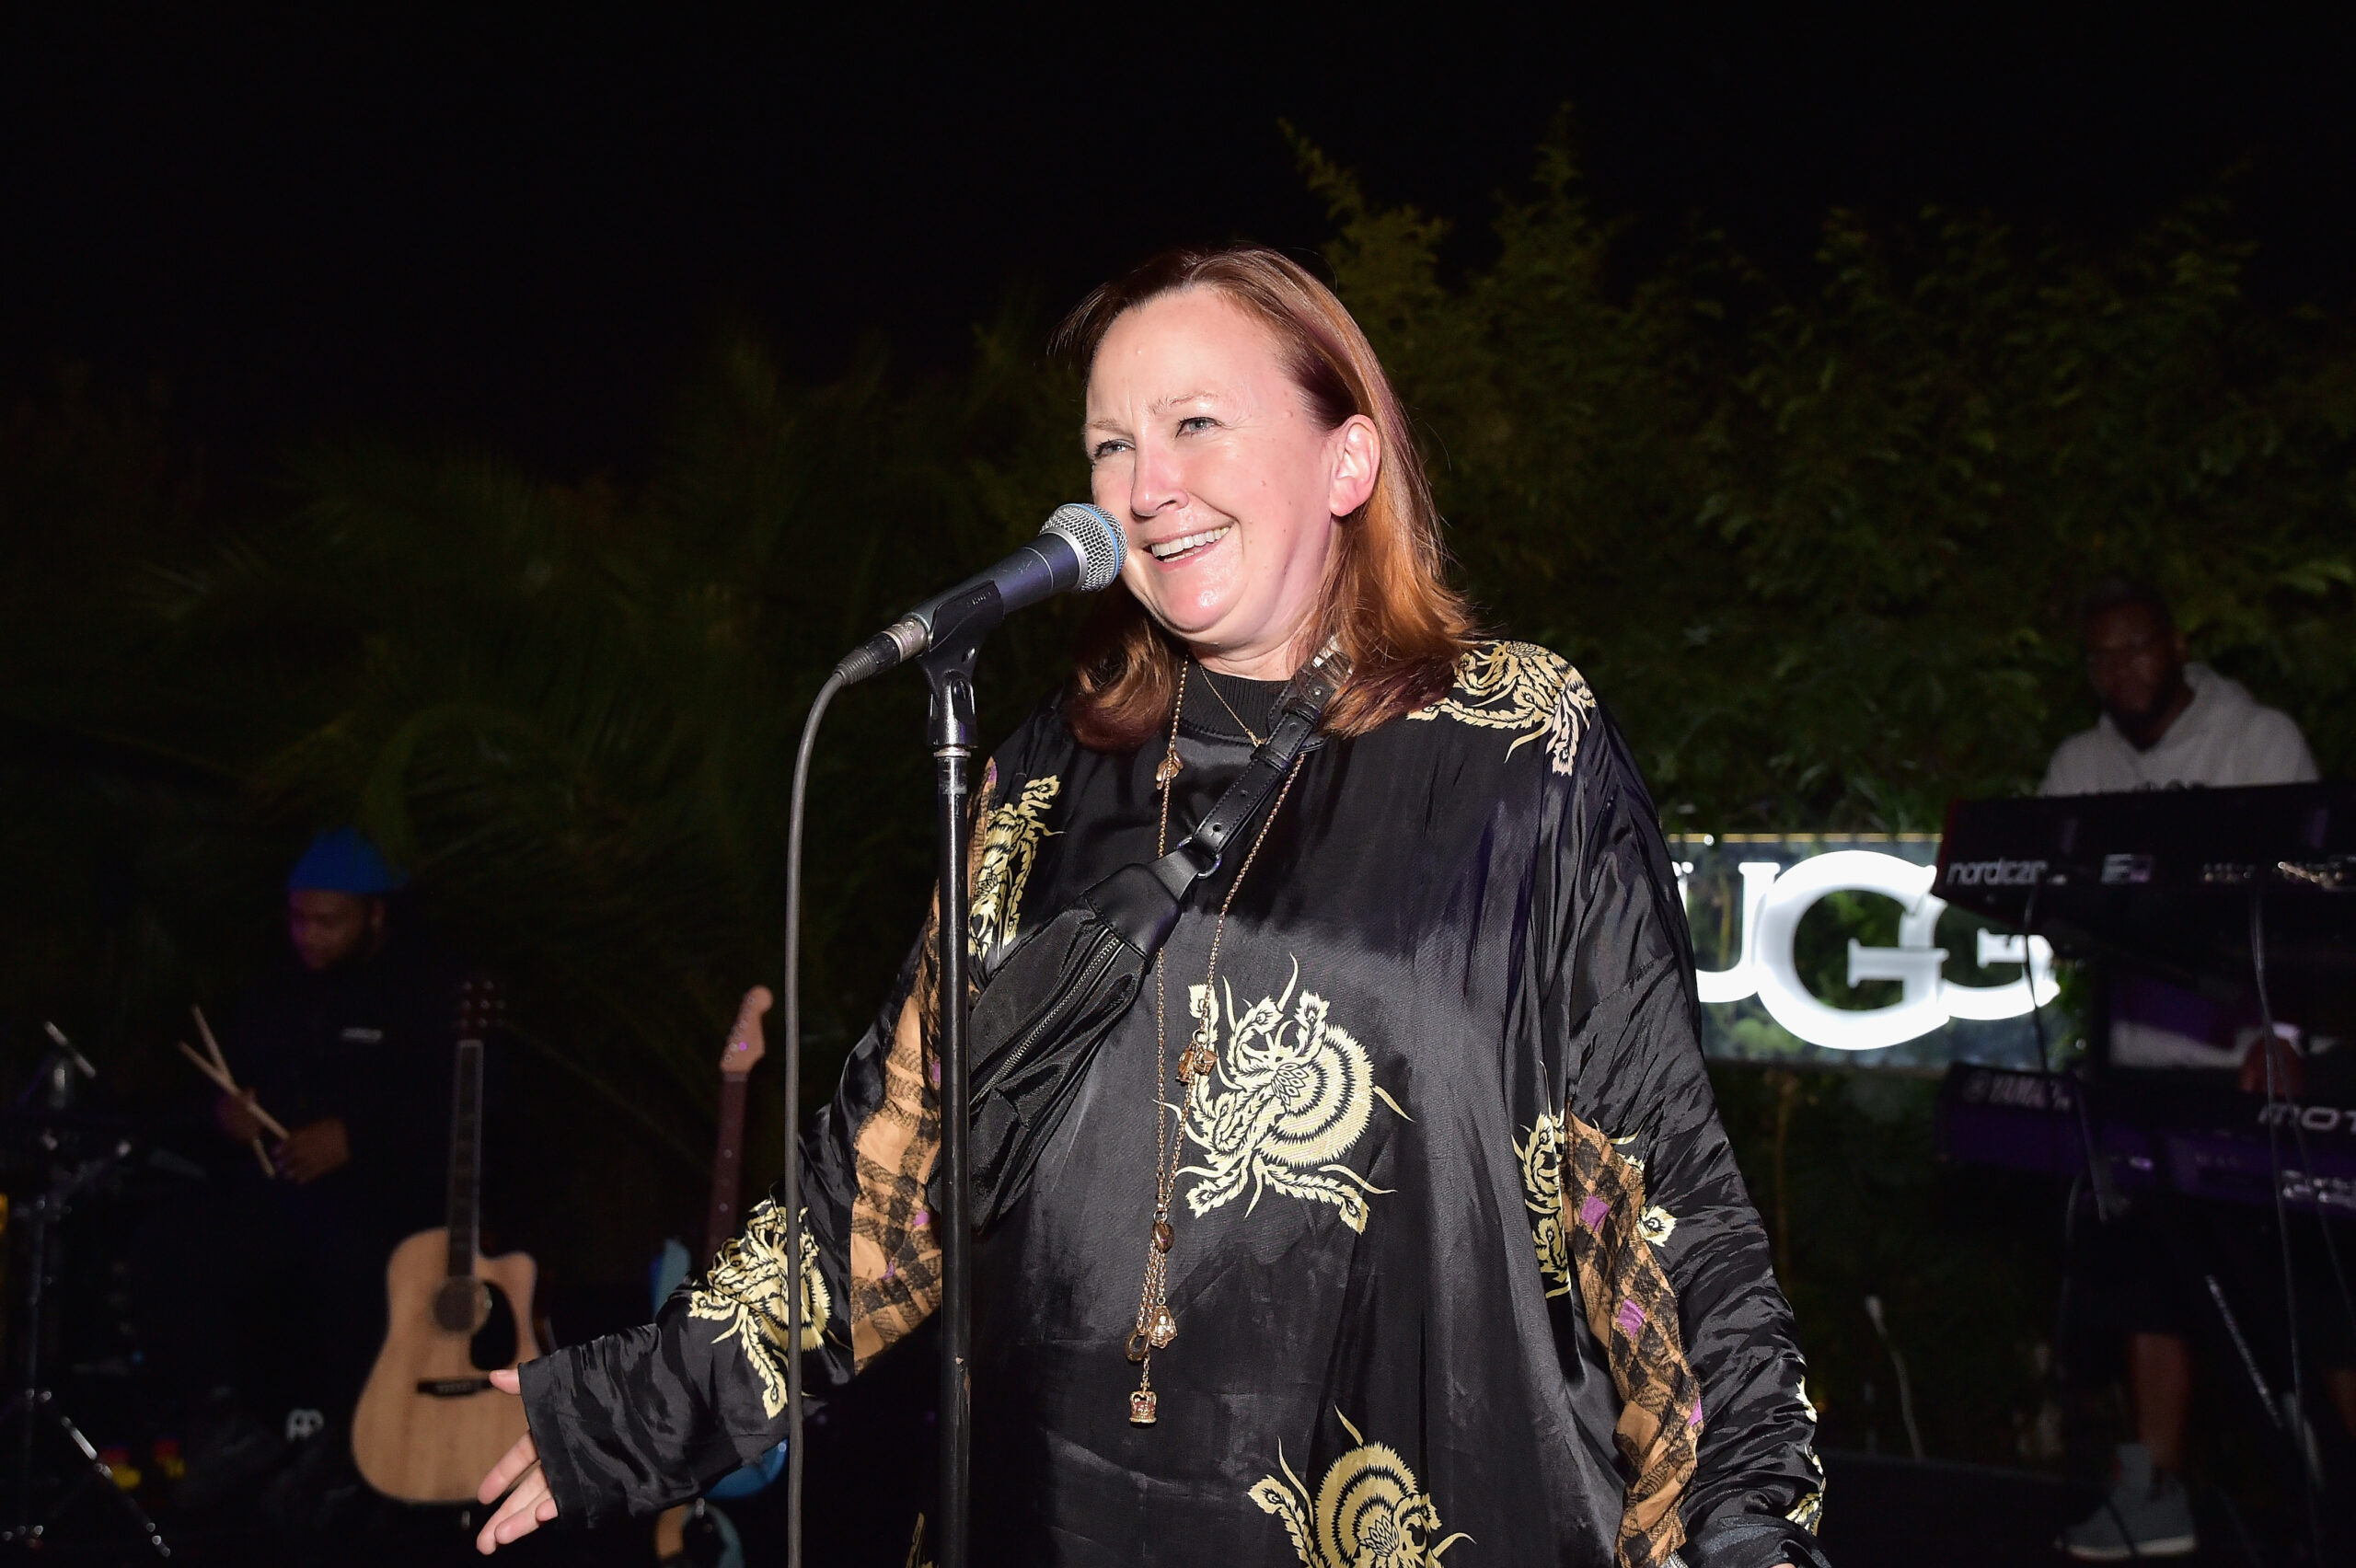 UGG Celebrates 40 Years at Chateau Marmont